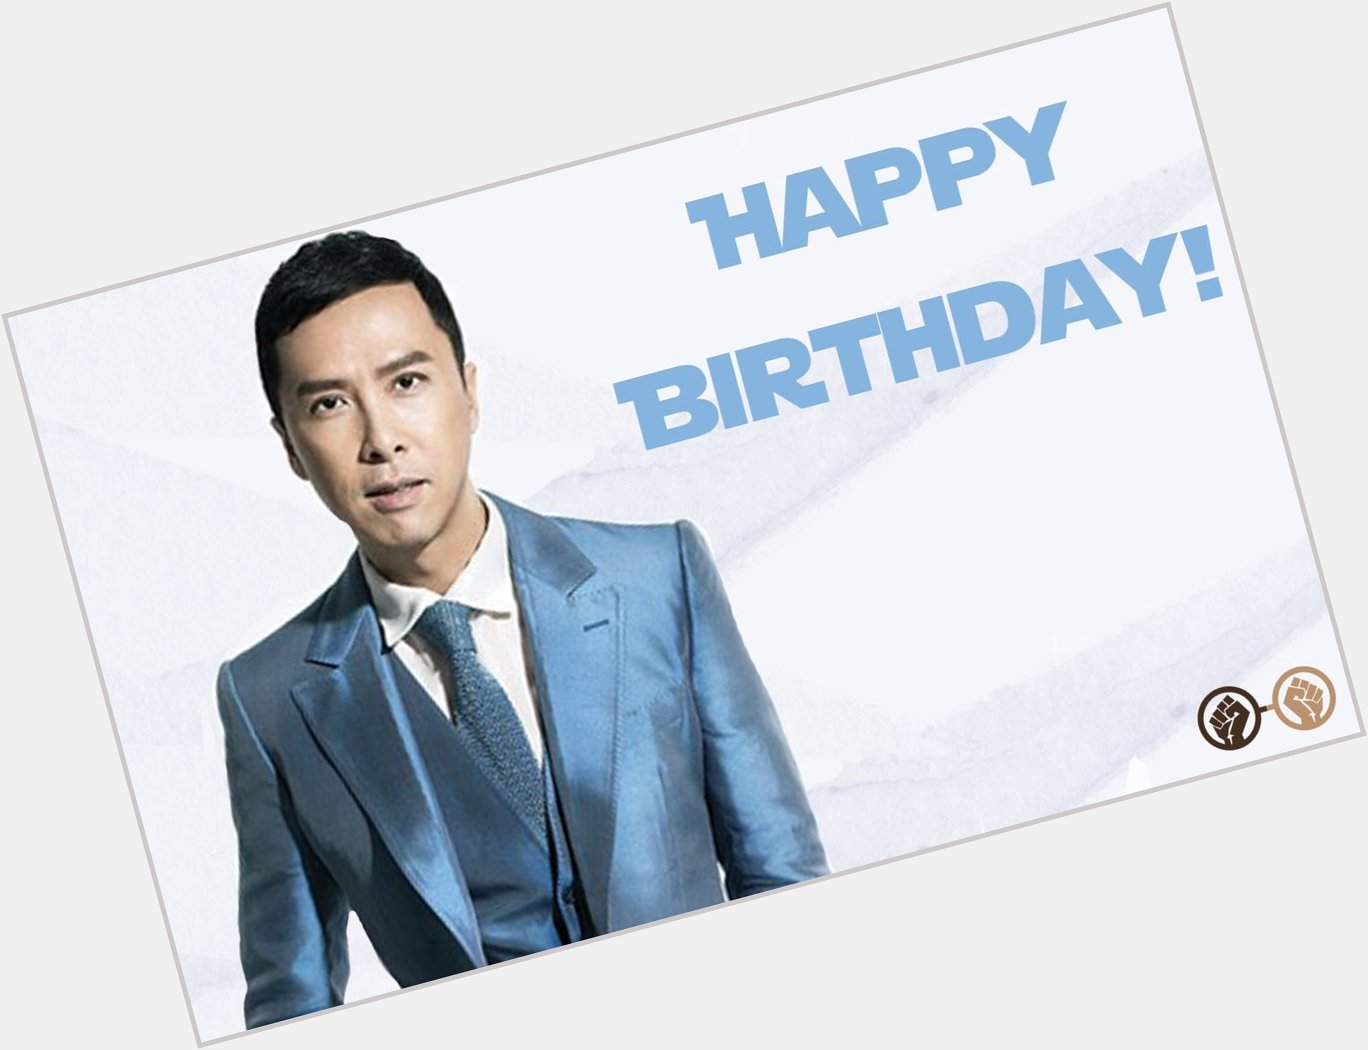 Happy birthday, Donnie Yen! The talented actor turns 55 today. We wish him all the best! 